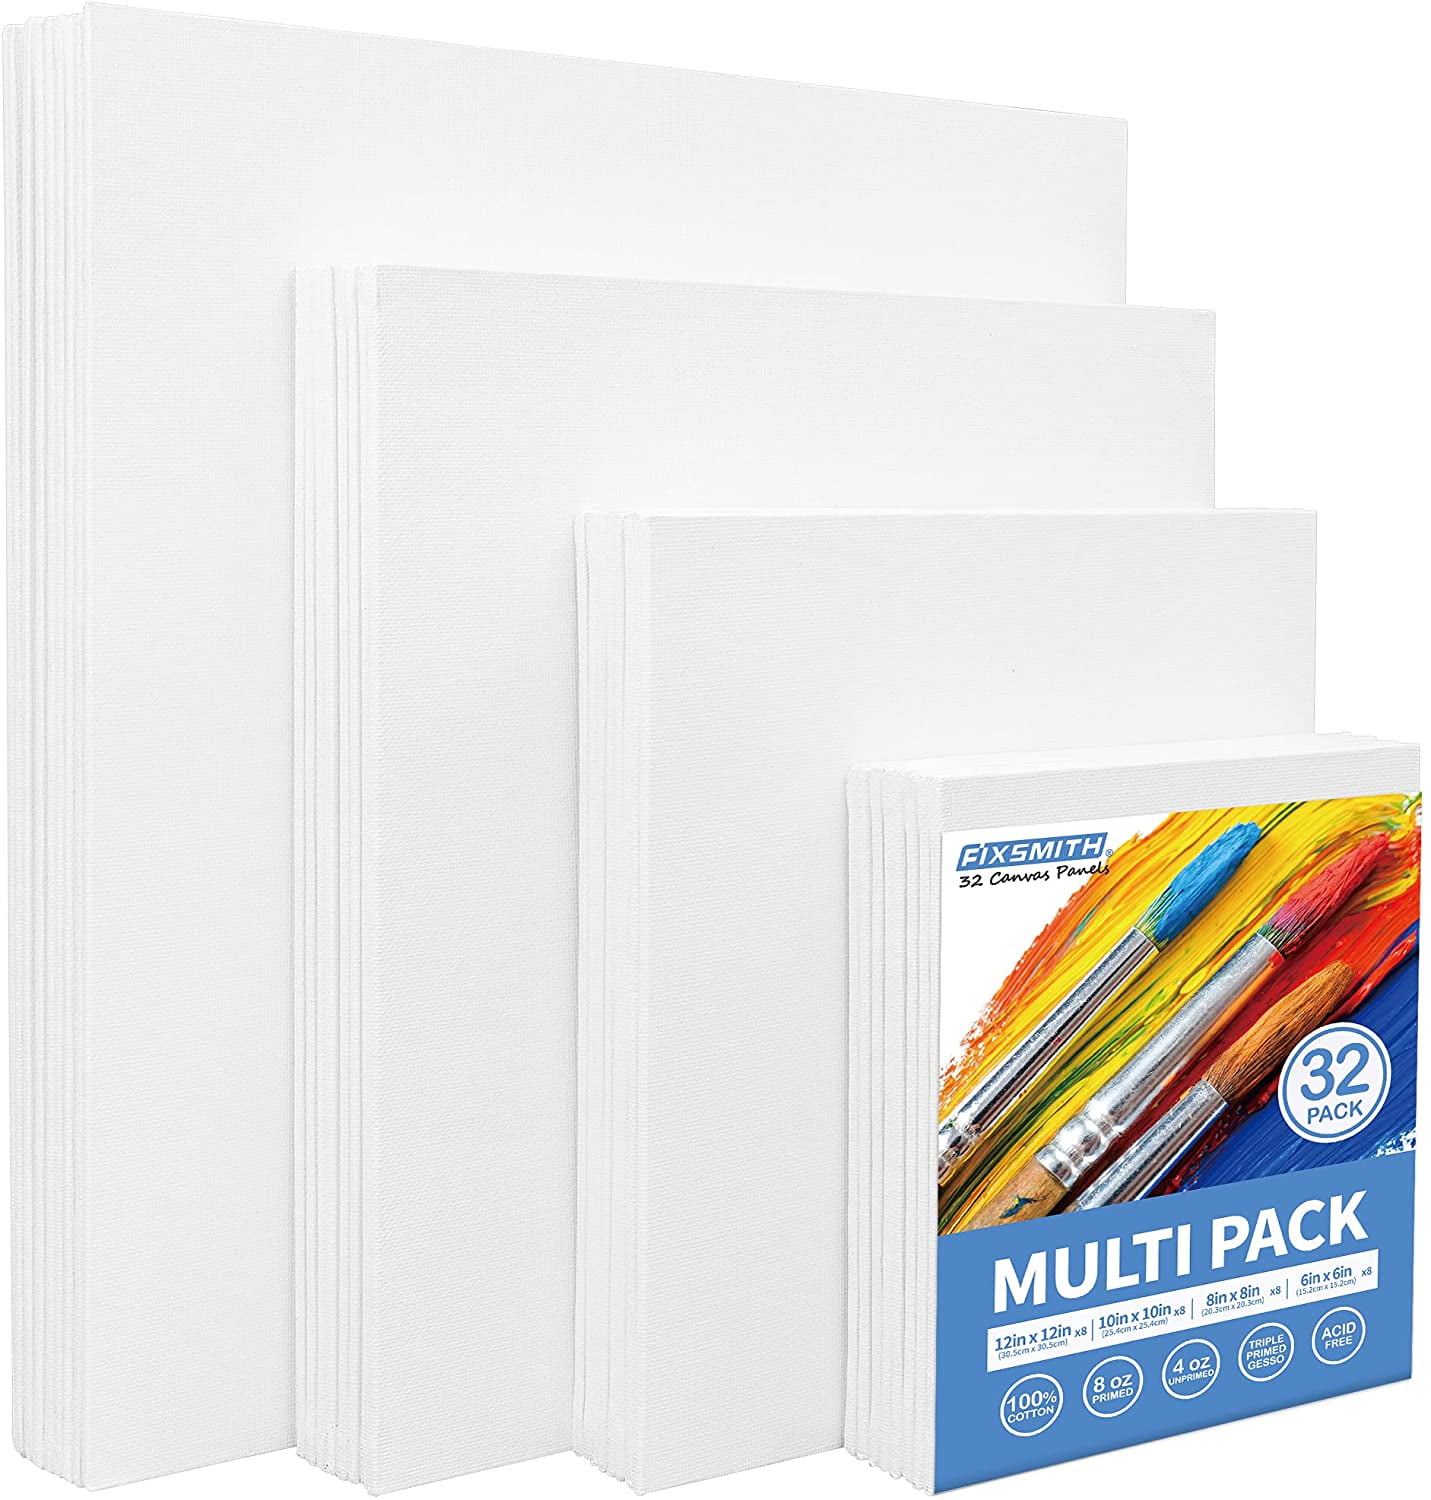  FIXSMITH Painting Canvas Panels Multi Pack- 6x6,8x8,10x10,12x12  (8 of Each),32 Pack,100% Cotton,Primed White Canvases,for Acrylic,Oil,Other  Wet or Dry Art Media,Art Gift for Kids,Adults,Beginners.